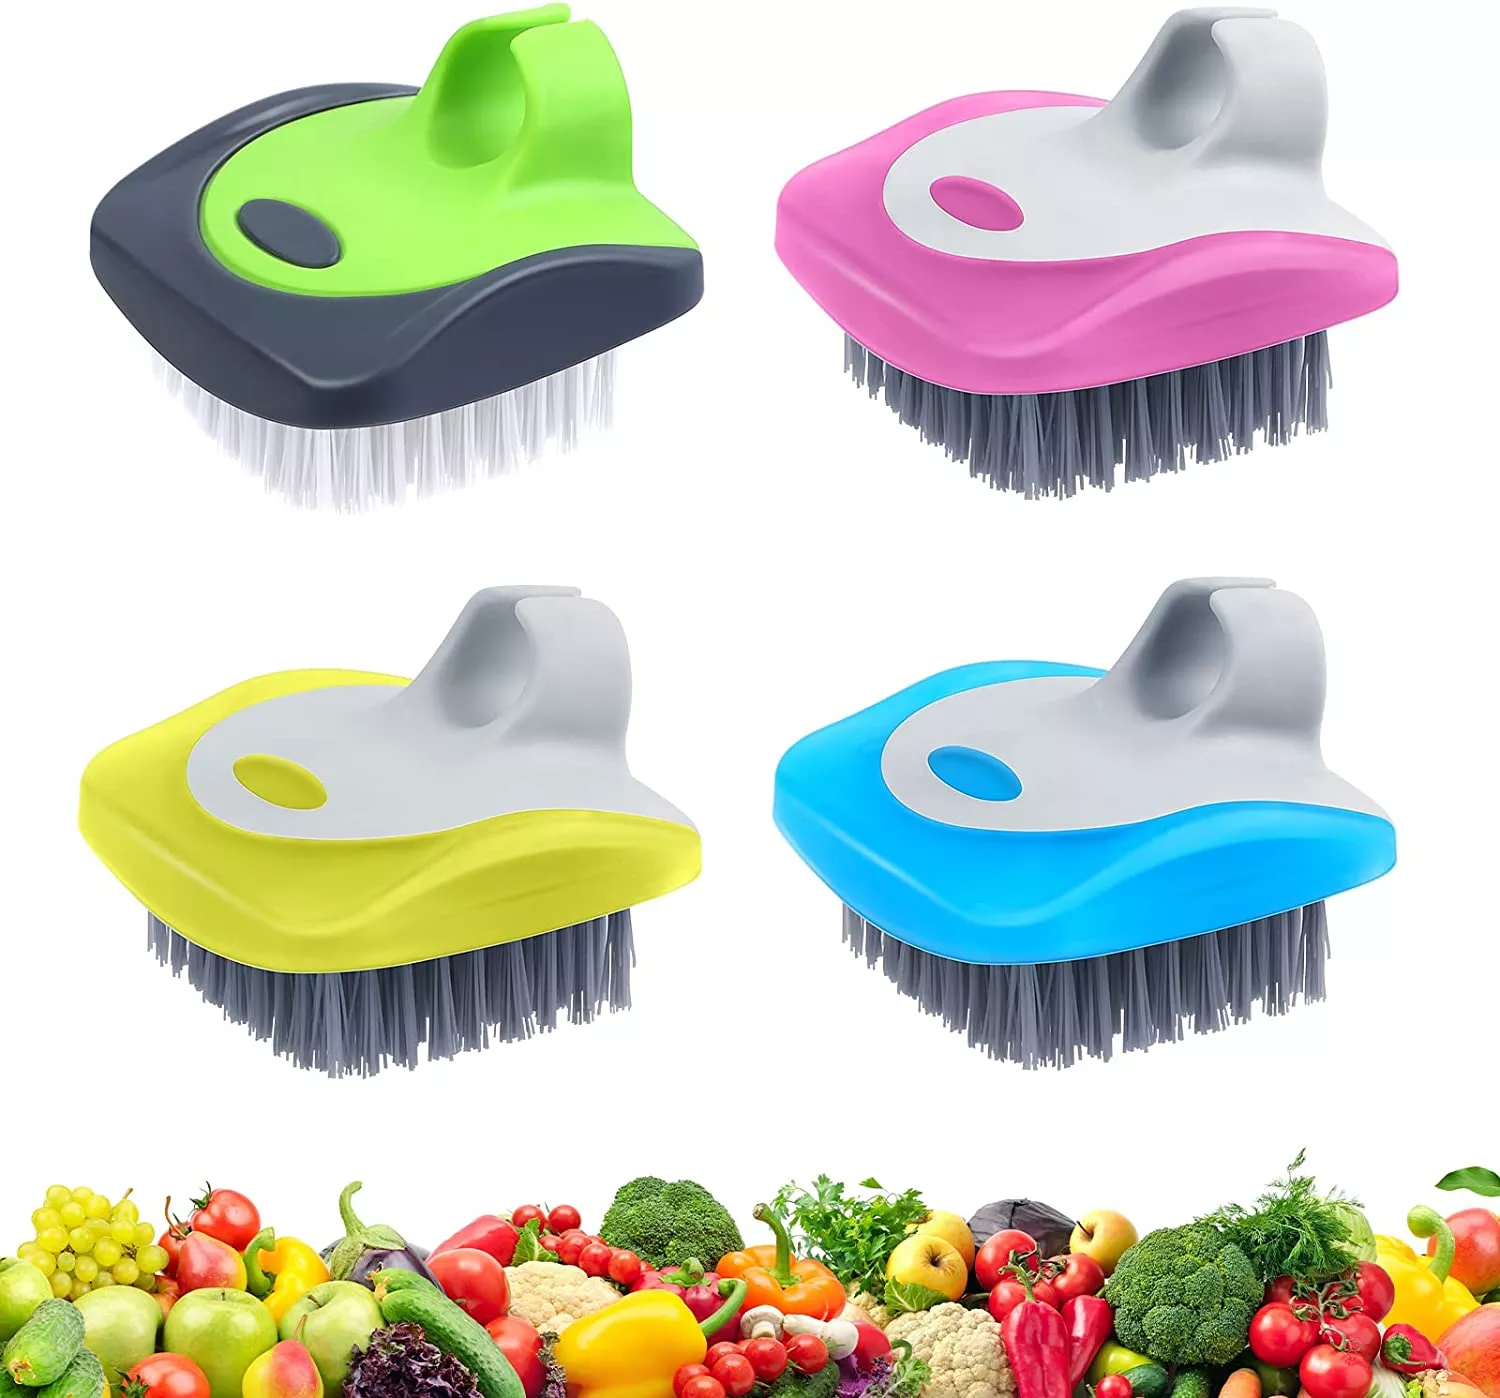 Topwill 2022 Hot Sale Kitchen Cleaning Tools Mushroom Vegetable Brush Durable Plastic Fruit and Vegetable Cleaning Brush